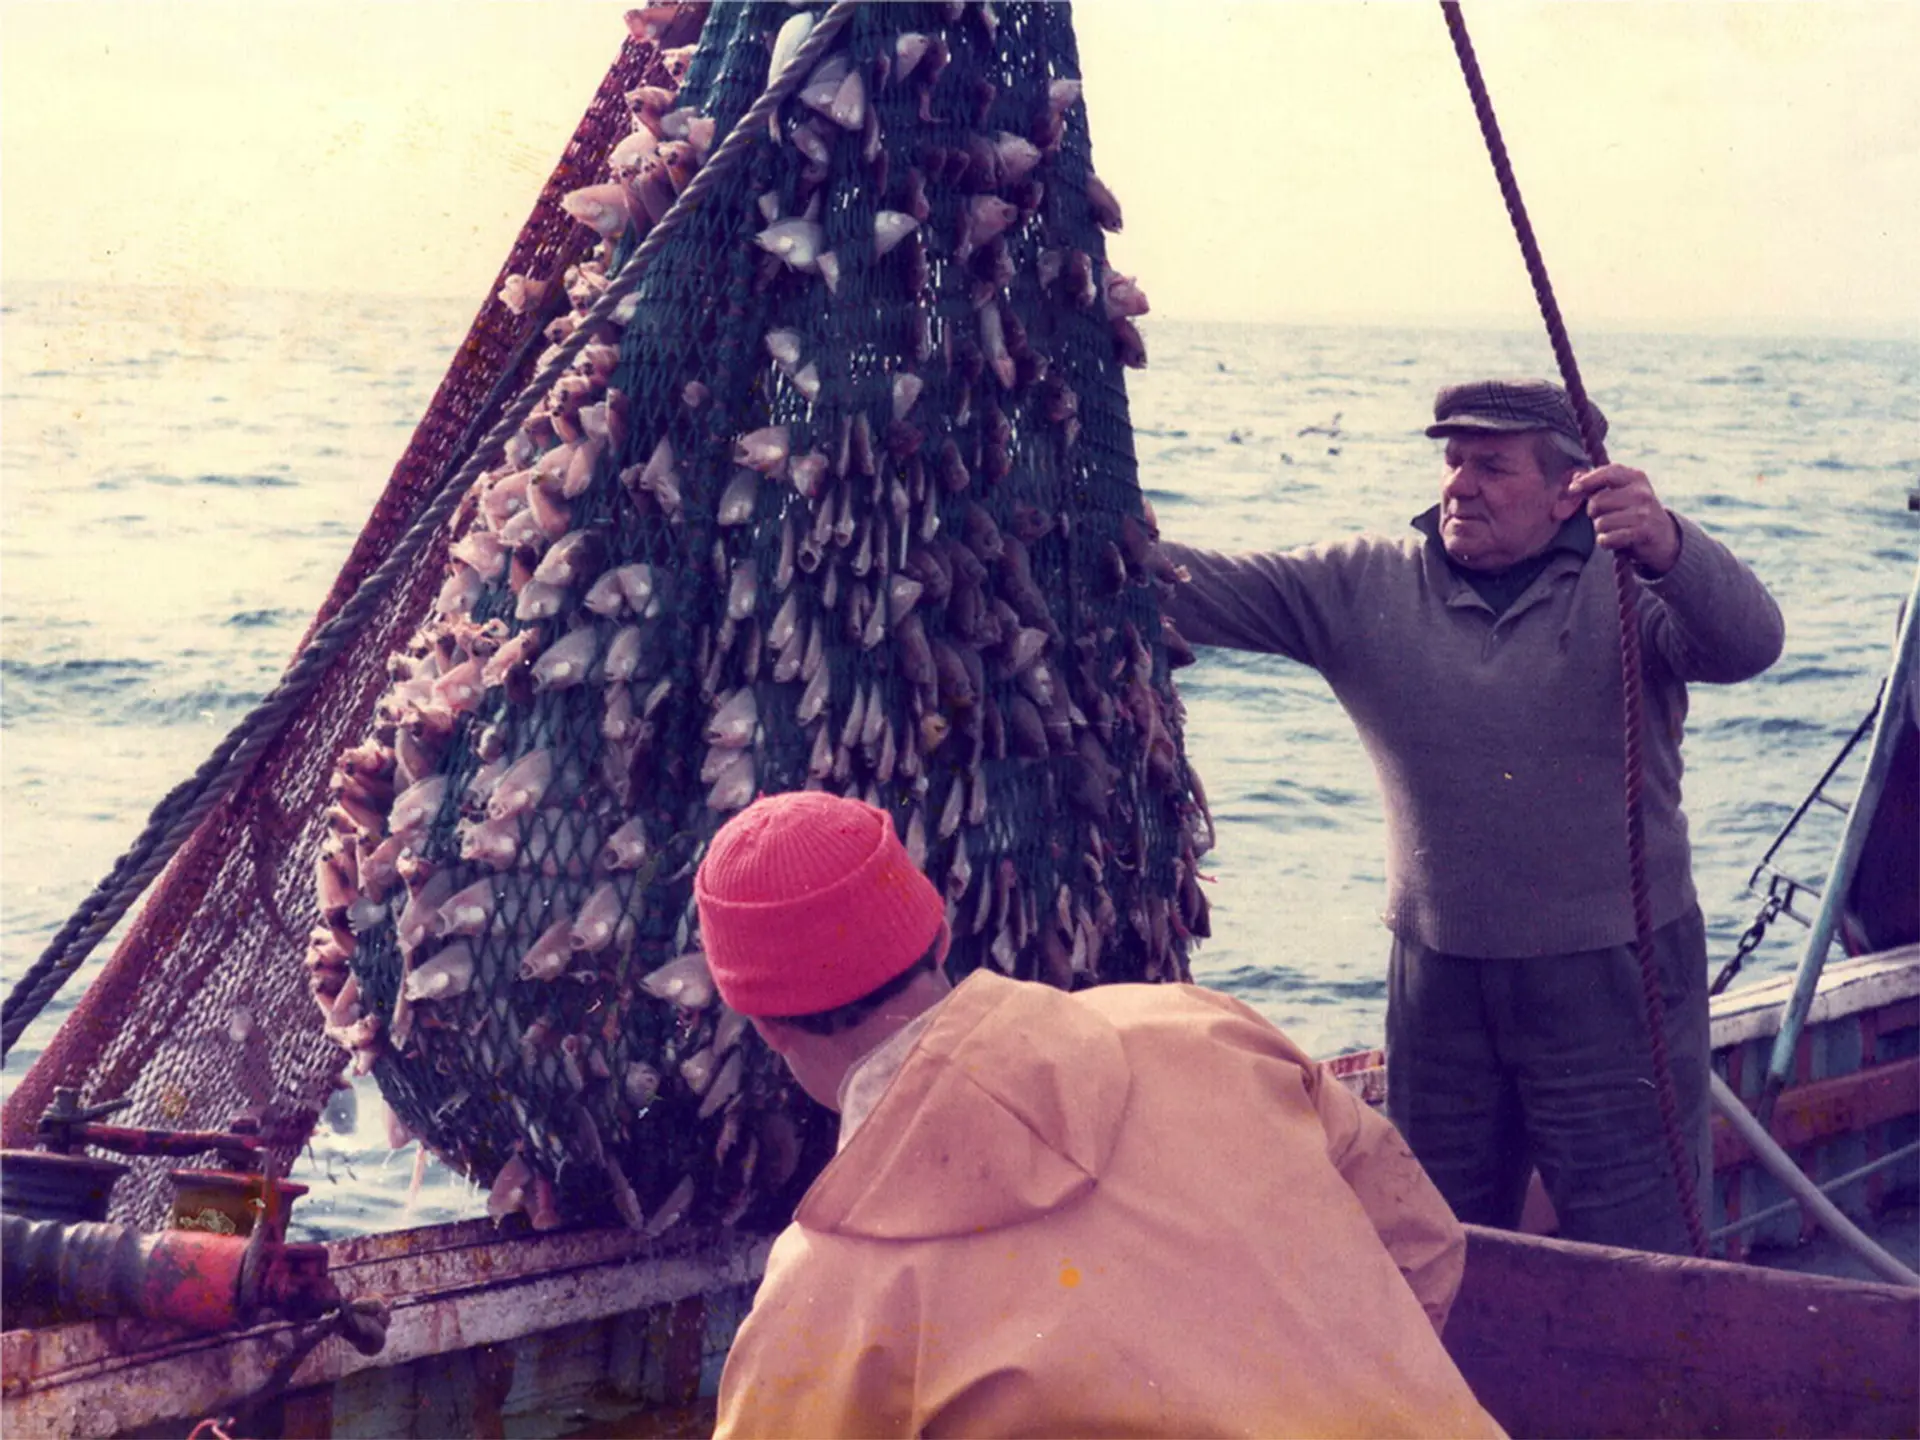 An image from the past. Two fishermen are bringing up a net full of fish onto their boat. One wears a yellow fisherman waterproof and a red beanie hat. The other wears a woollen jumper and a flat cap. 